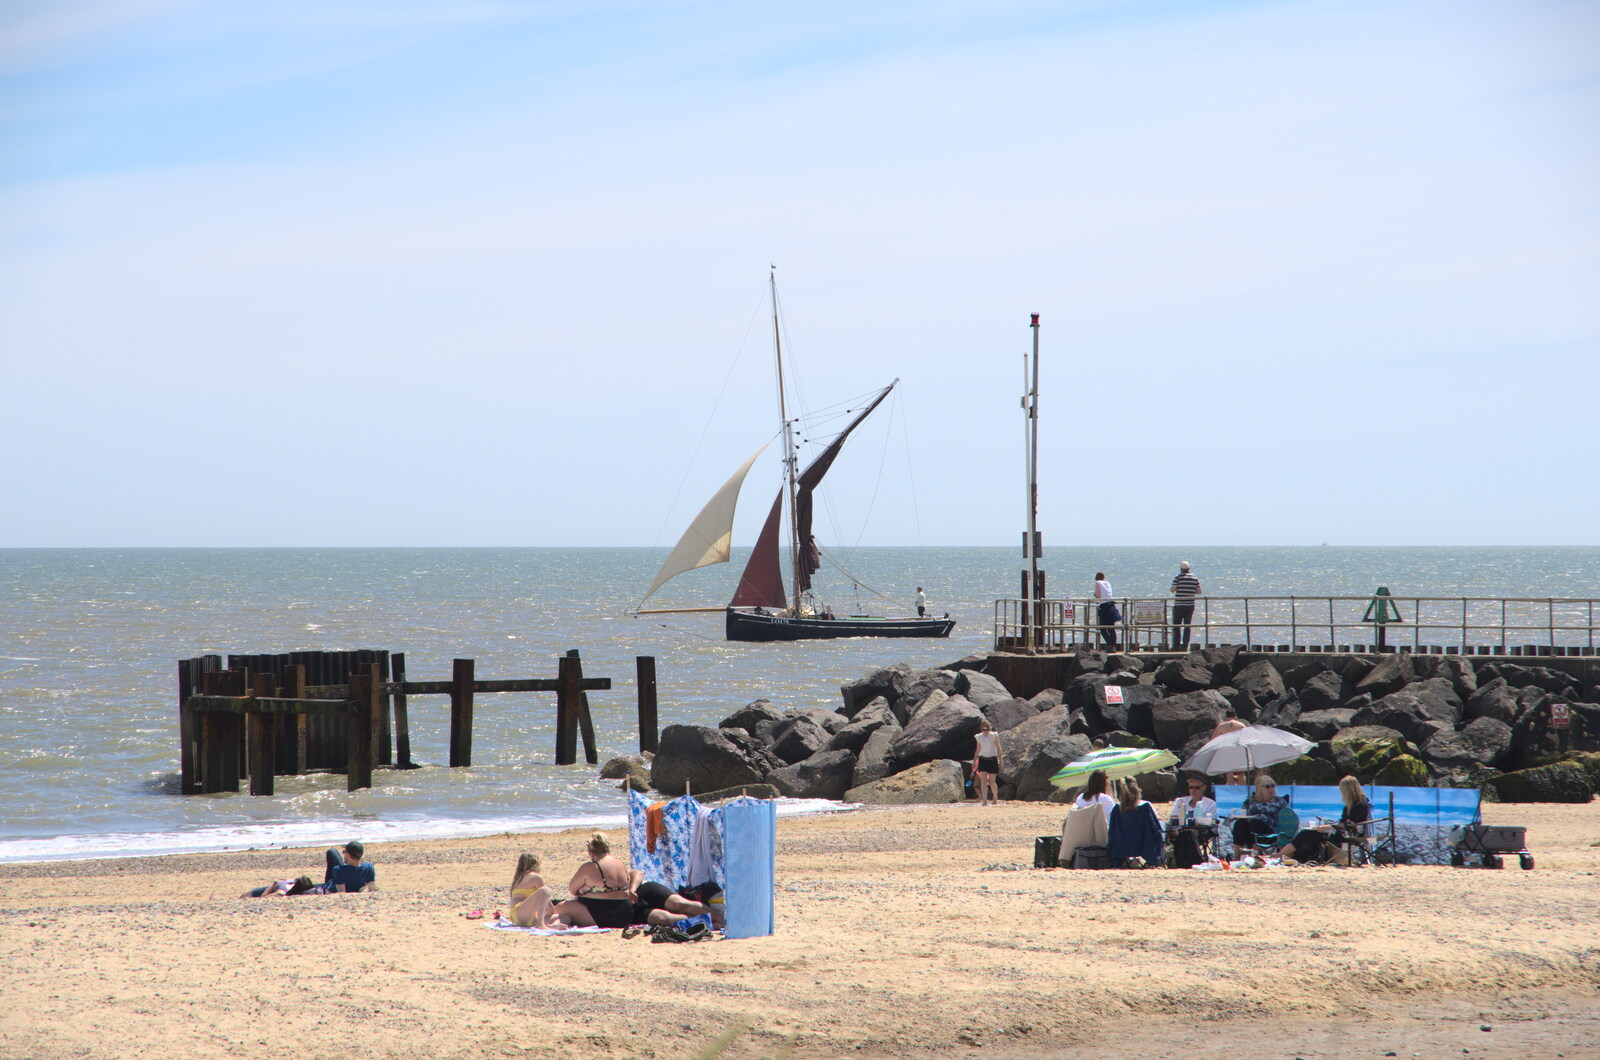 The boat unfurls its sails from A Return to Southwold, Suffolk - 14th June 2020